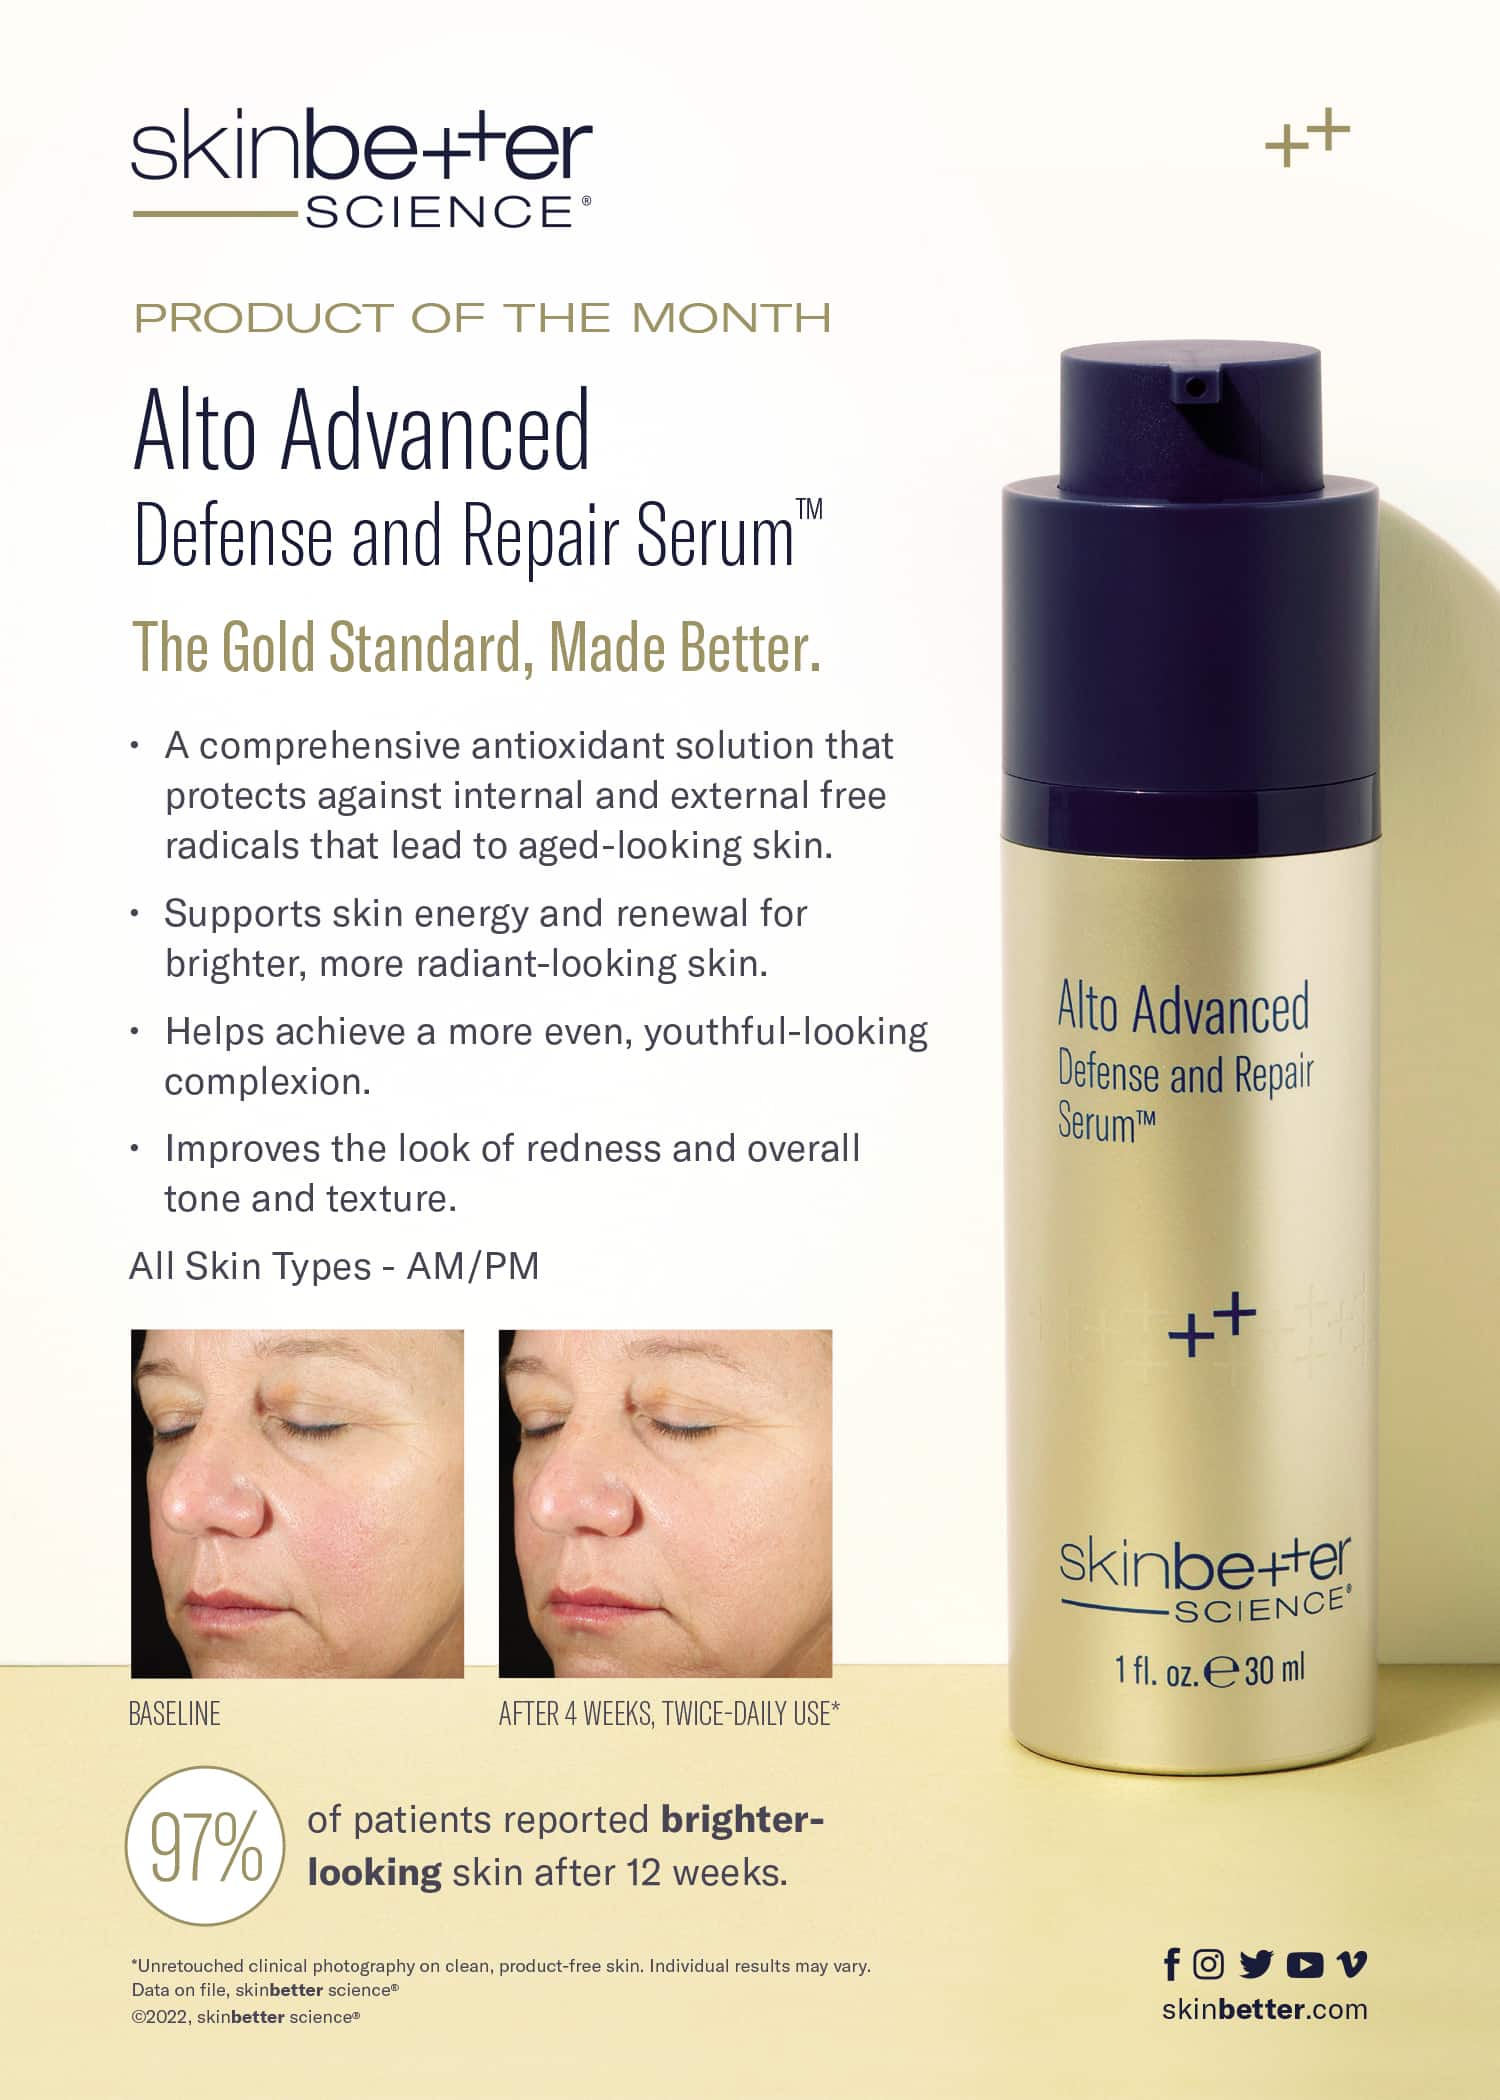 Alto Advanced Defense and Repair Serum Product of the Month 5x7 HQP